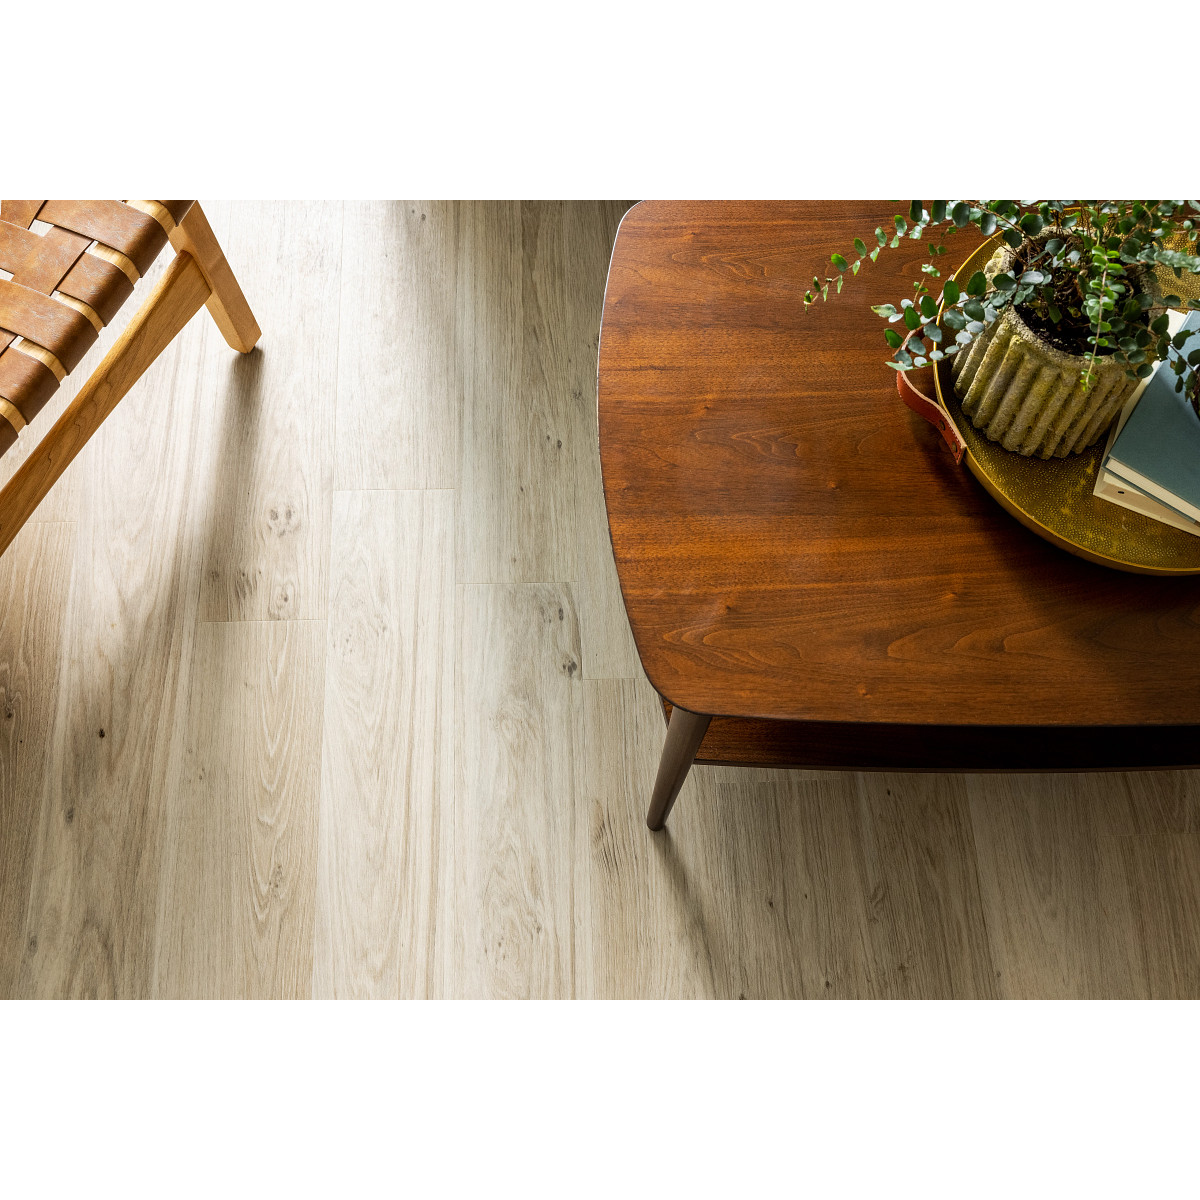 Shaw Boundless 8 Aroma 8-mil x 7-in W x 48-in L Waterproof Glue Down Luxury  Vinyl Plank Flooring in the Vinyl Plank department at